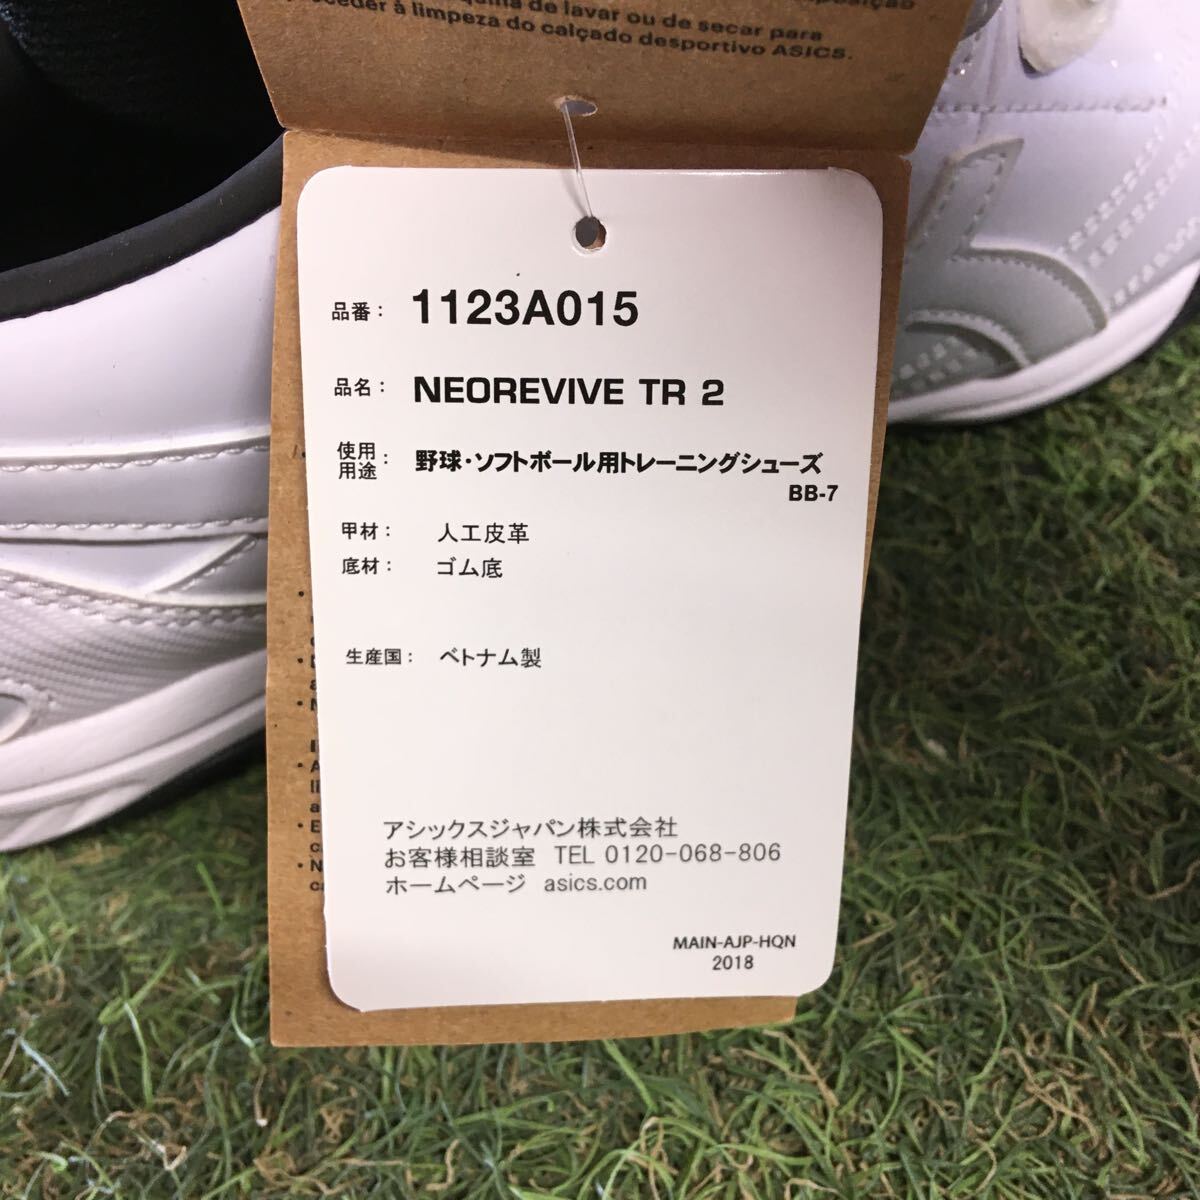 RK564 asics 1123A015 NEOREVIVE TR 2 野球ソフトボール用トレーニングシューズ 24.5cm 未使用 展示品 靴の画像6